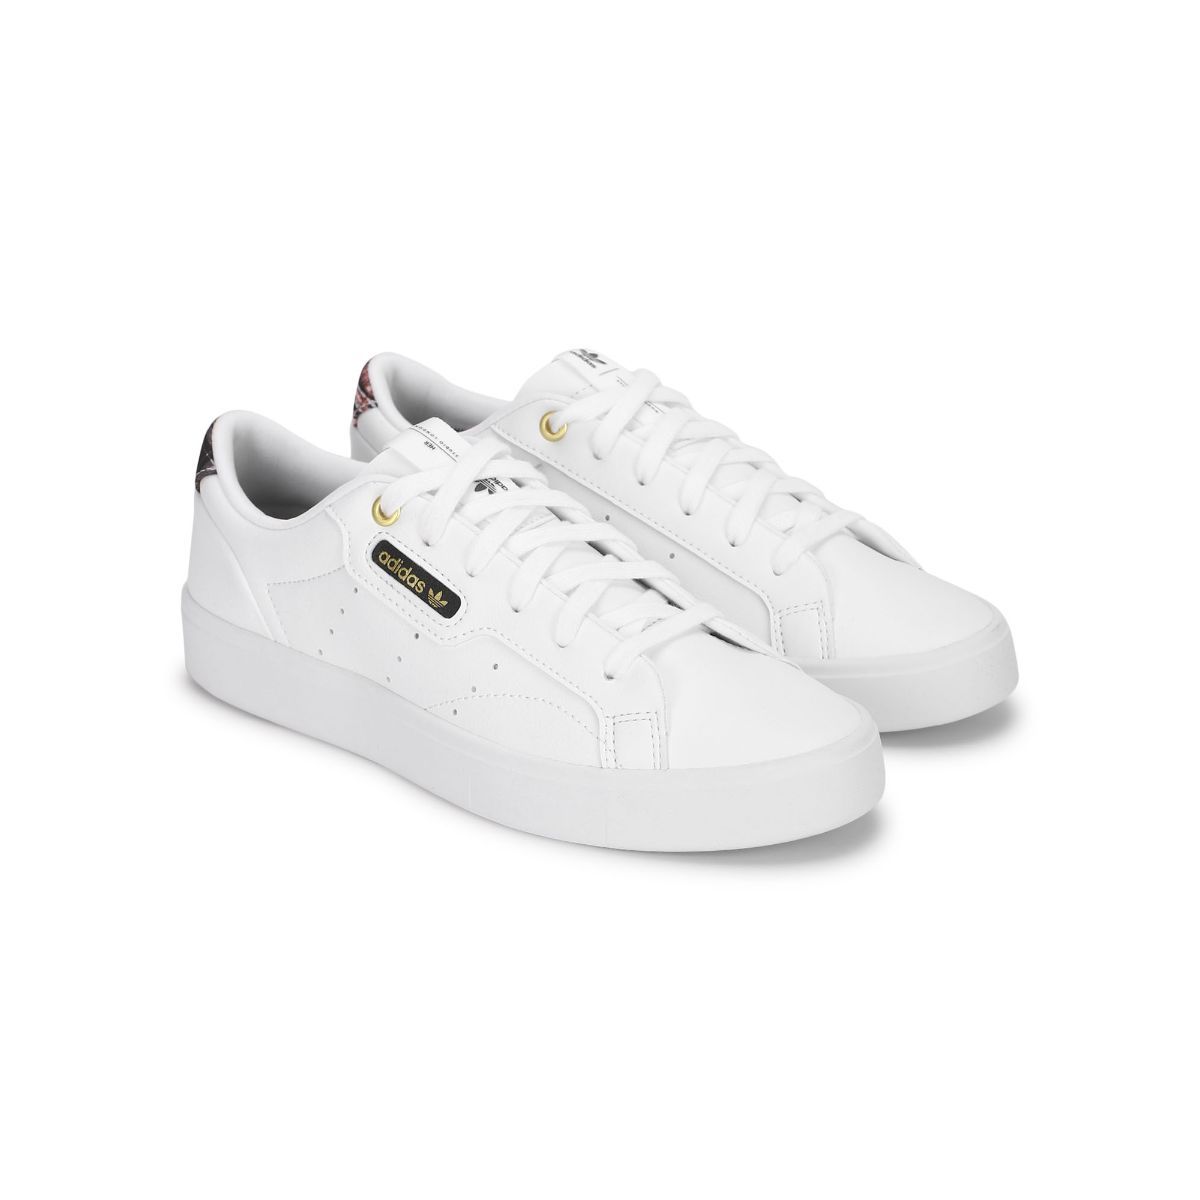 Buy adidas Womens Continental 80 Lace Up Sneakers Shoes Casual - White -  Size 5.5 B at Amazon.in